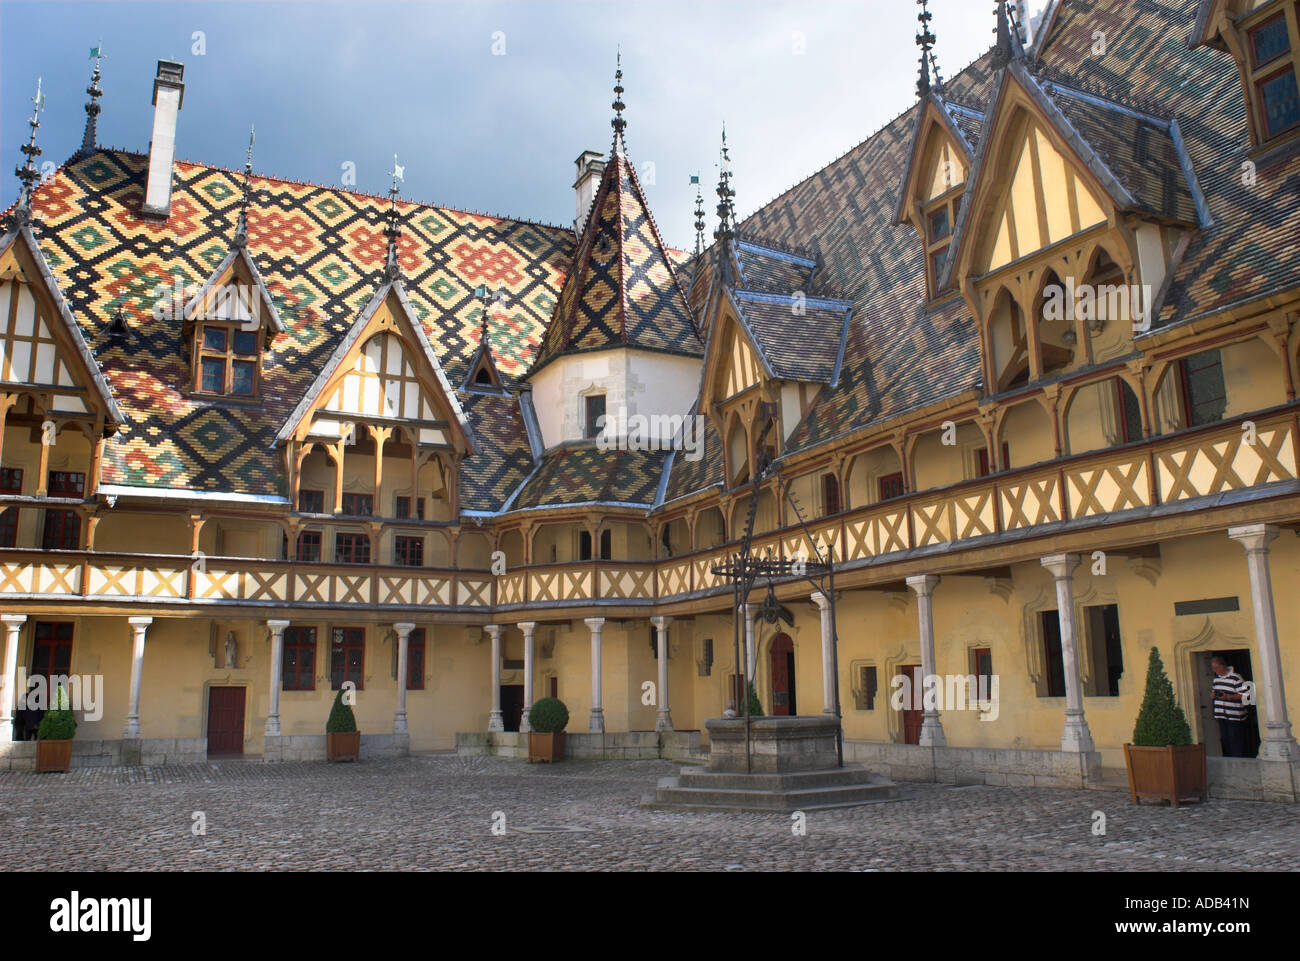 Hospices de Beaune. Polychrome roofs and dormers, Hotel-Dieu, Beaune, France. Stock Photo